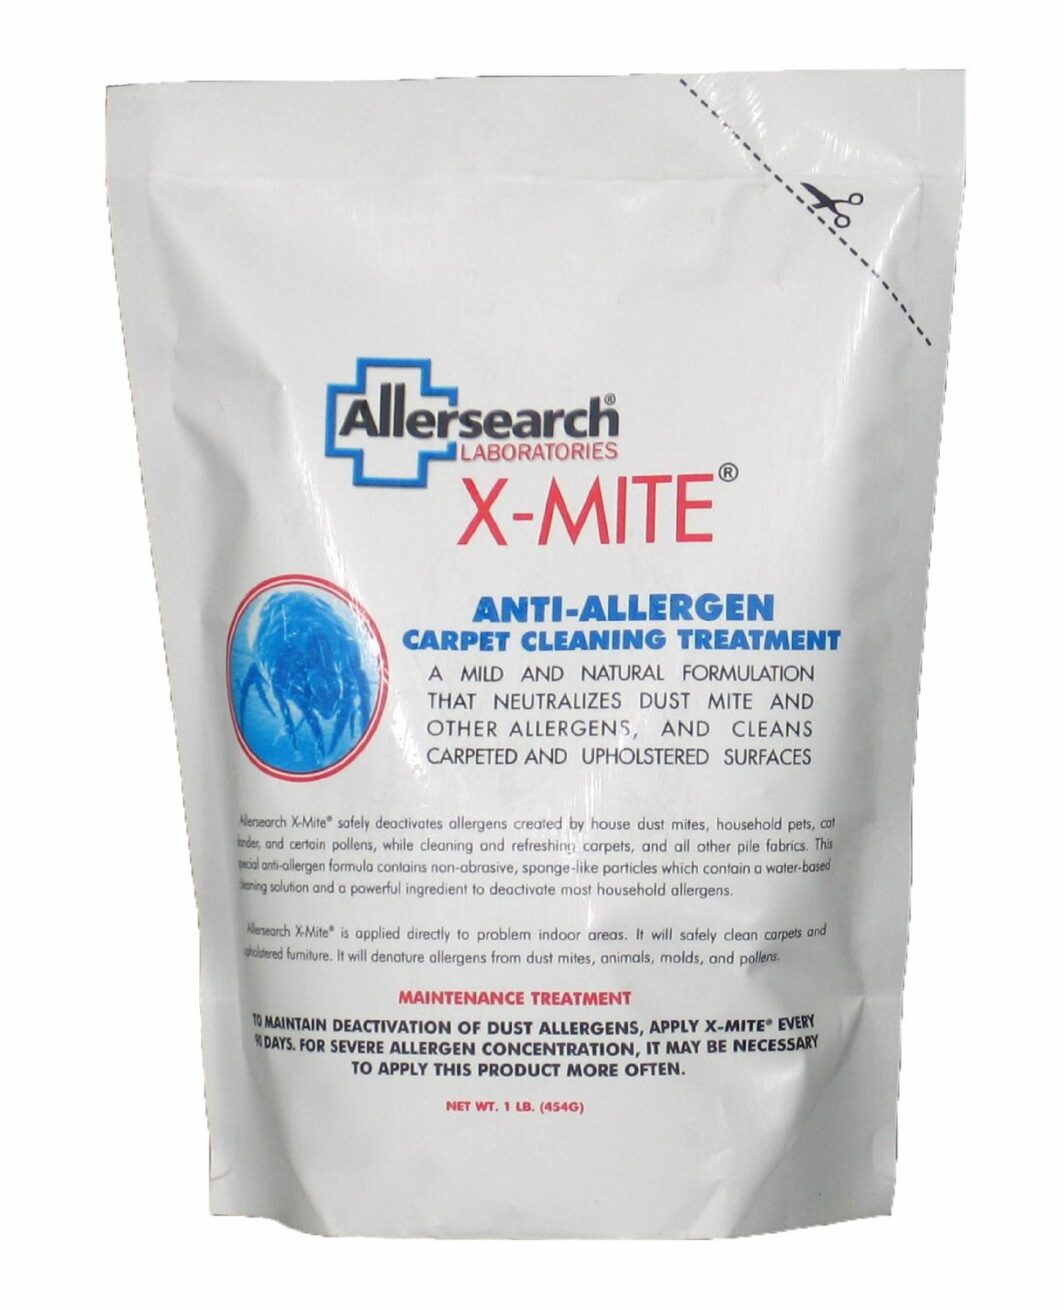 Allersearch X-Mite Carpet Cleaning Treatment